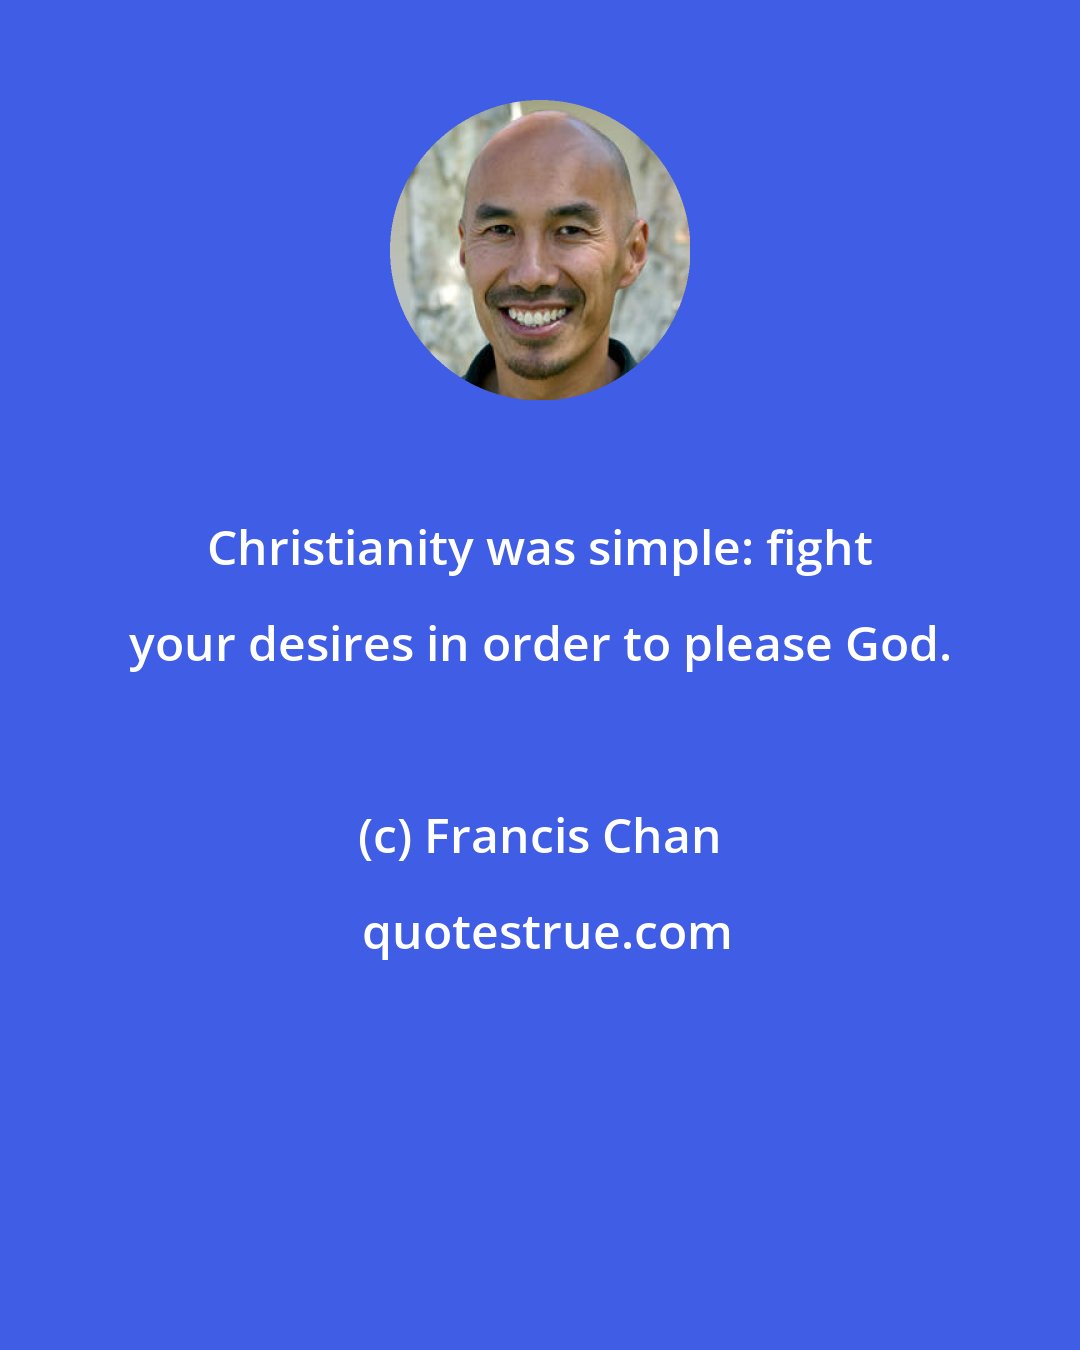 Francis Chan: Christianity was simple: fight your desires in order to please God.